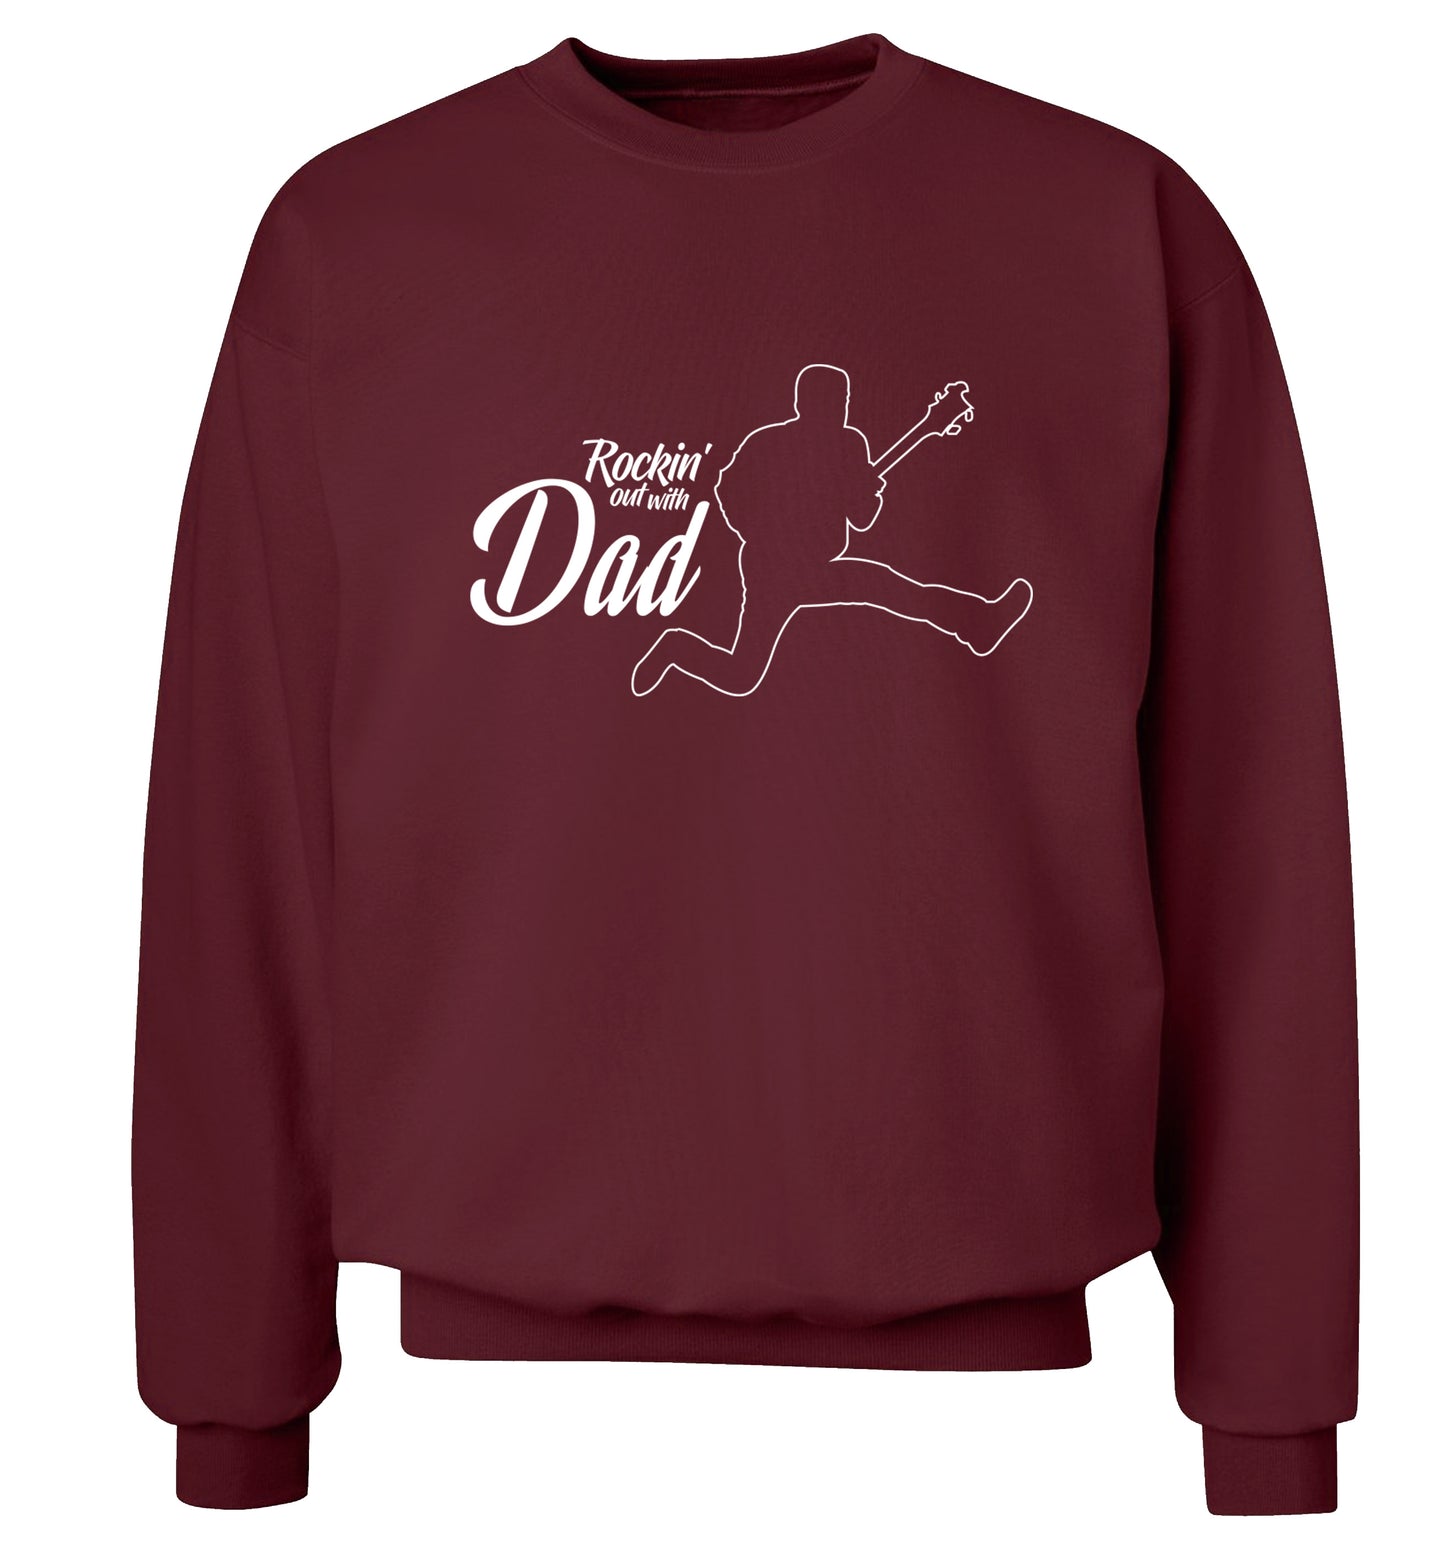 Rockin out with dad Adult's unisex maroon Sweater 2XL